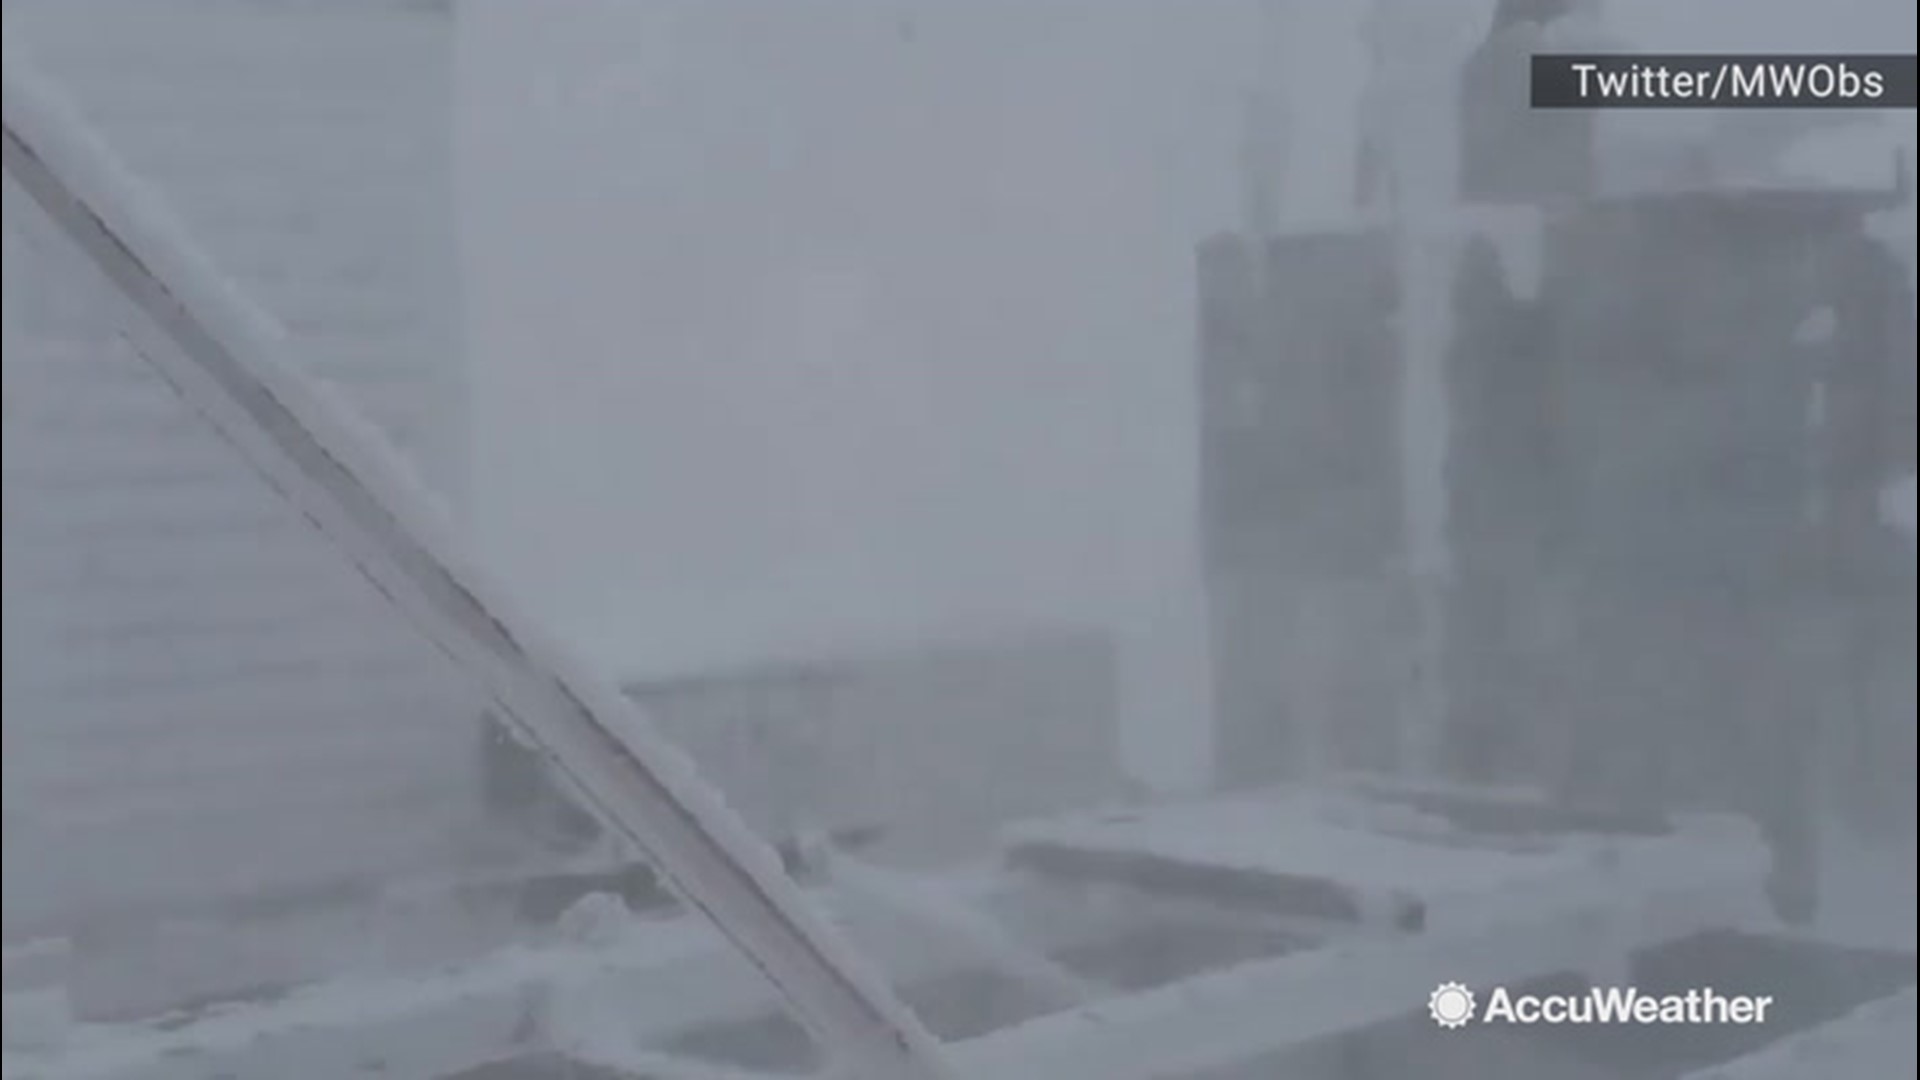 Howling winds gusted up to 80 mph at the Mount Washington Observatory in Conway, New Hampshire, on Friday, Nov. 8.